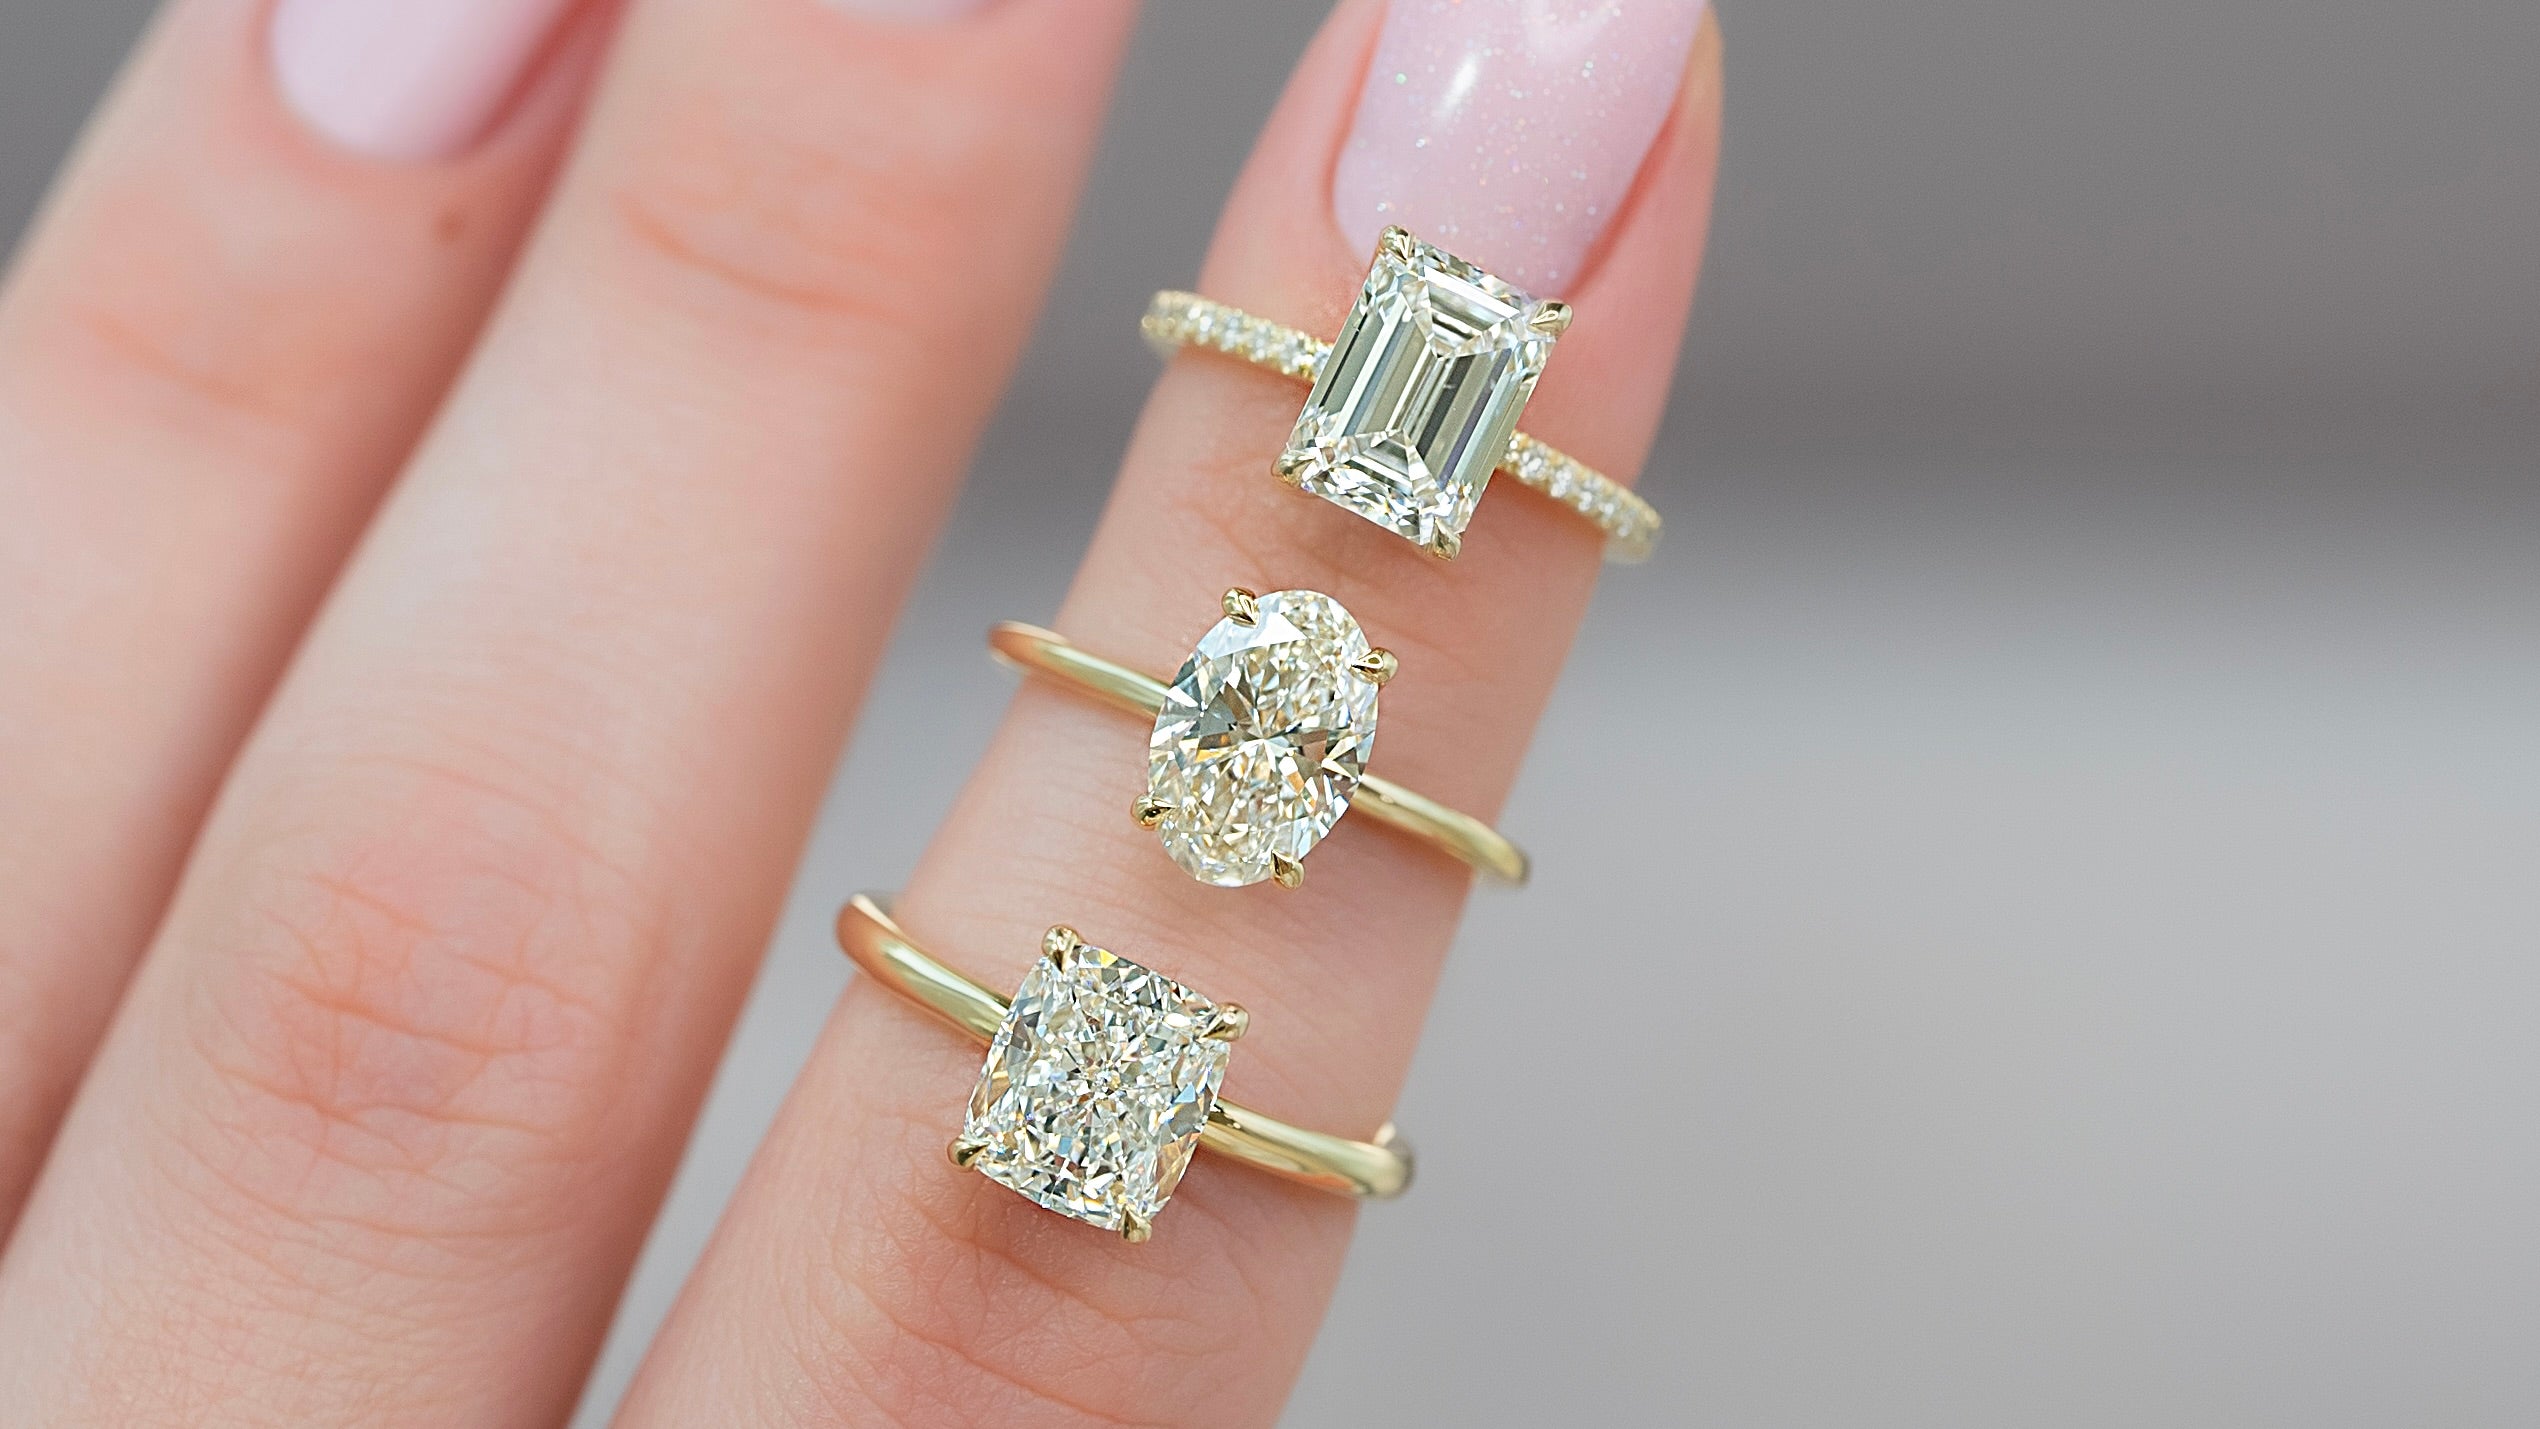 Customize Your Commitment: Personalized Add-Ons for Engagement Rings